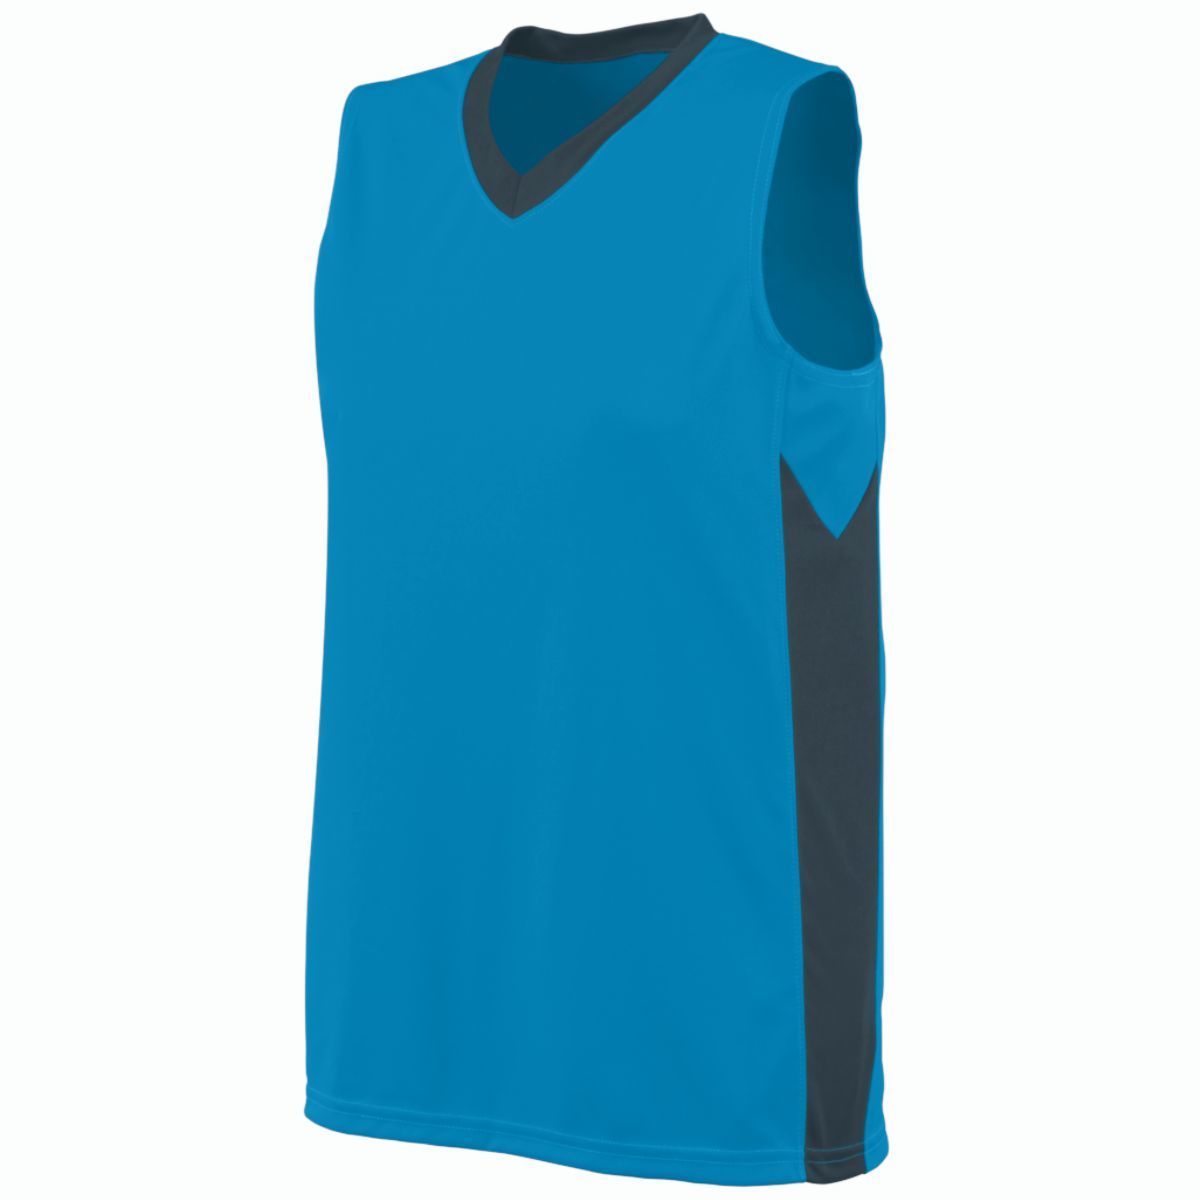 Augusta Sportswear Ladies Block Out Jersey in Power Blue/Slate  -Part of the Ladies, Ladies-Jersey, Augusta-Products, Basketball, Shirts, All-Sports, All-Sports-1 product lines at KanaleyCreations.com